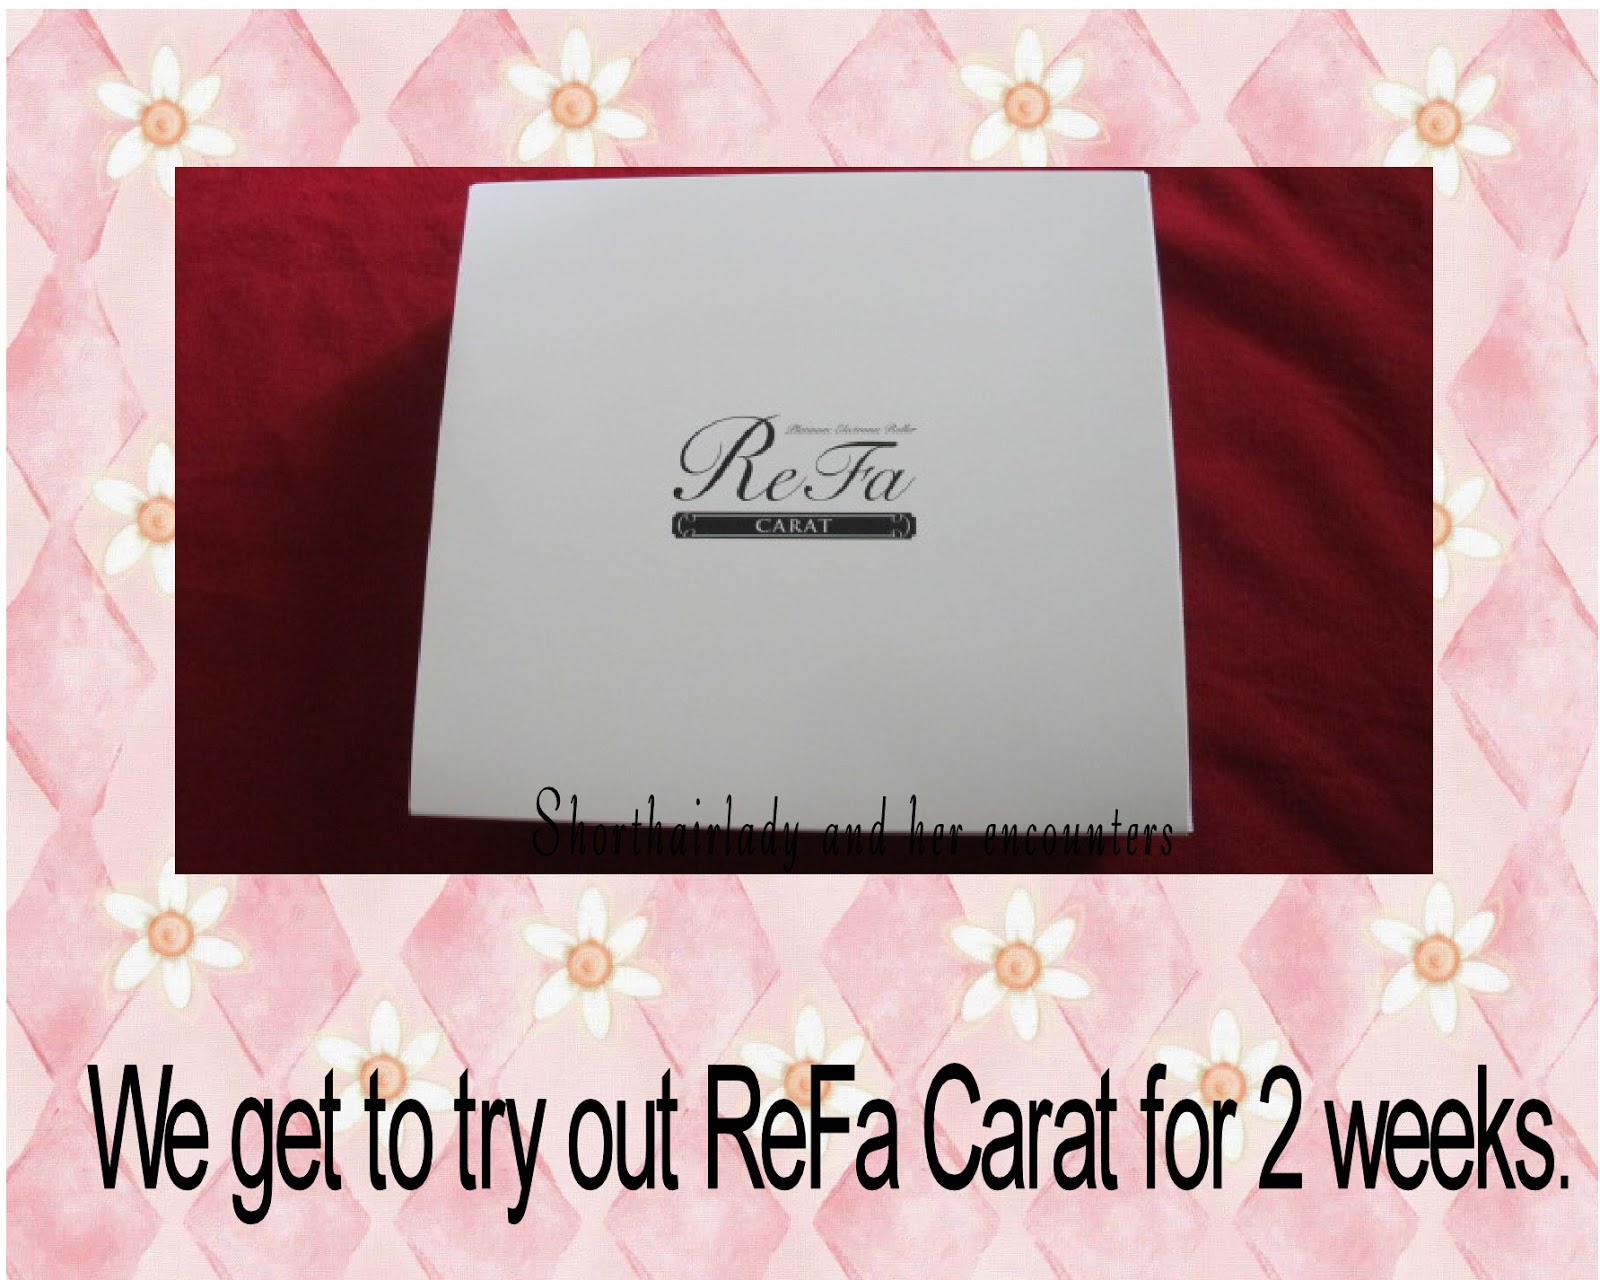 Shorthairlady & her encounters: Review of ReFa Carat